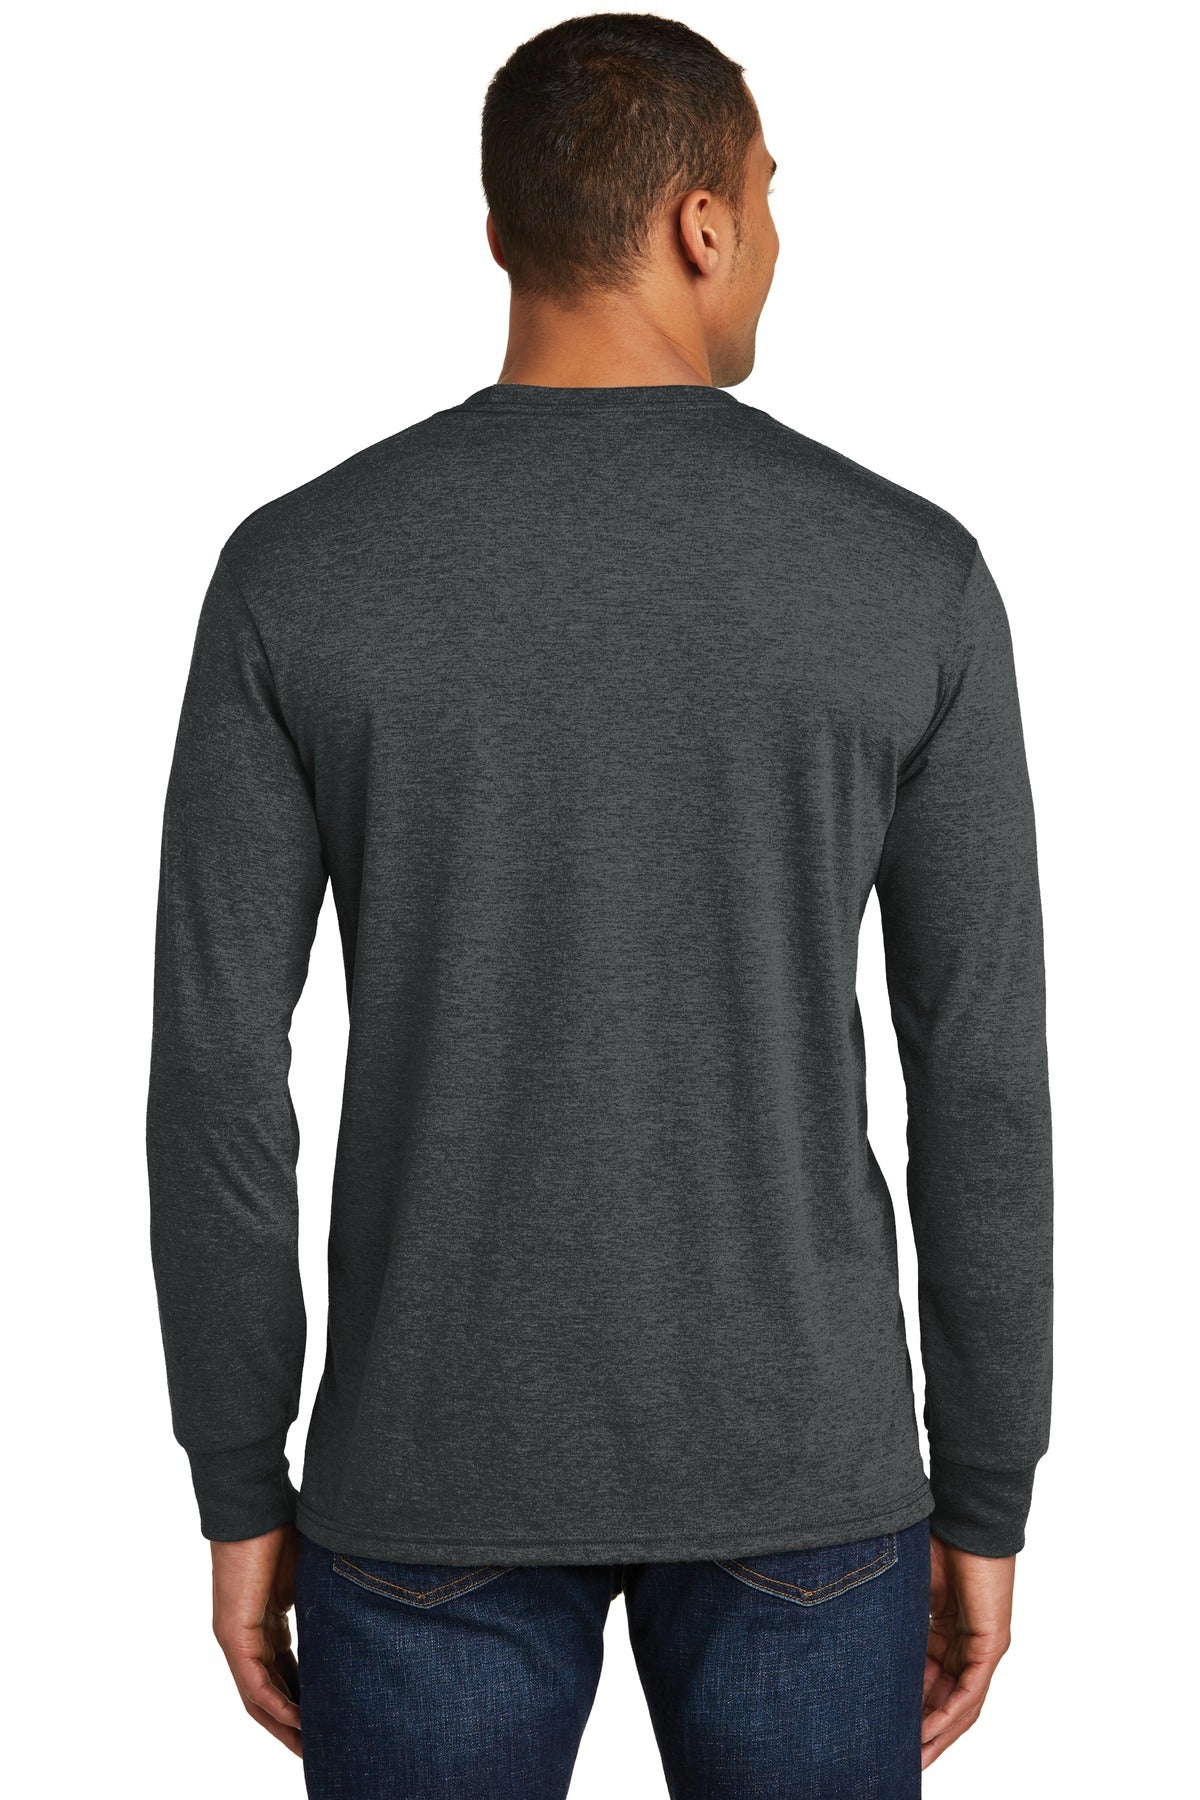 District Perfect Tri Long Sleeve Tee . DM132